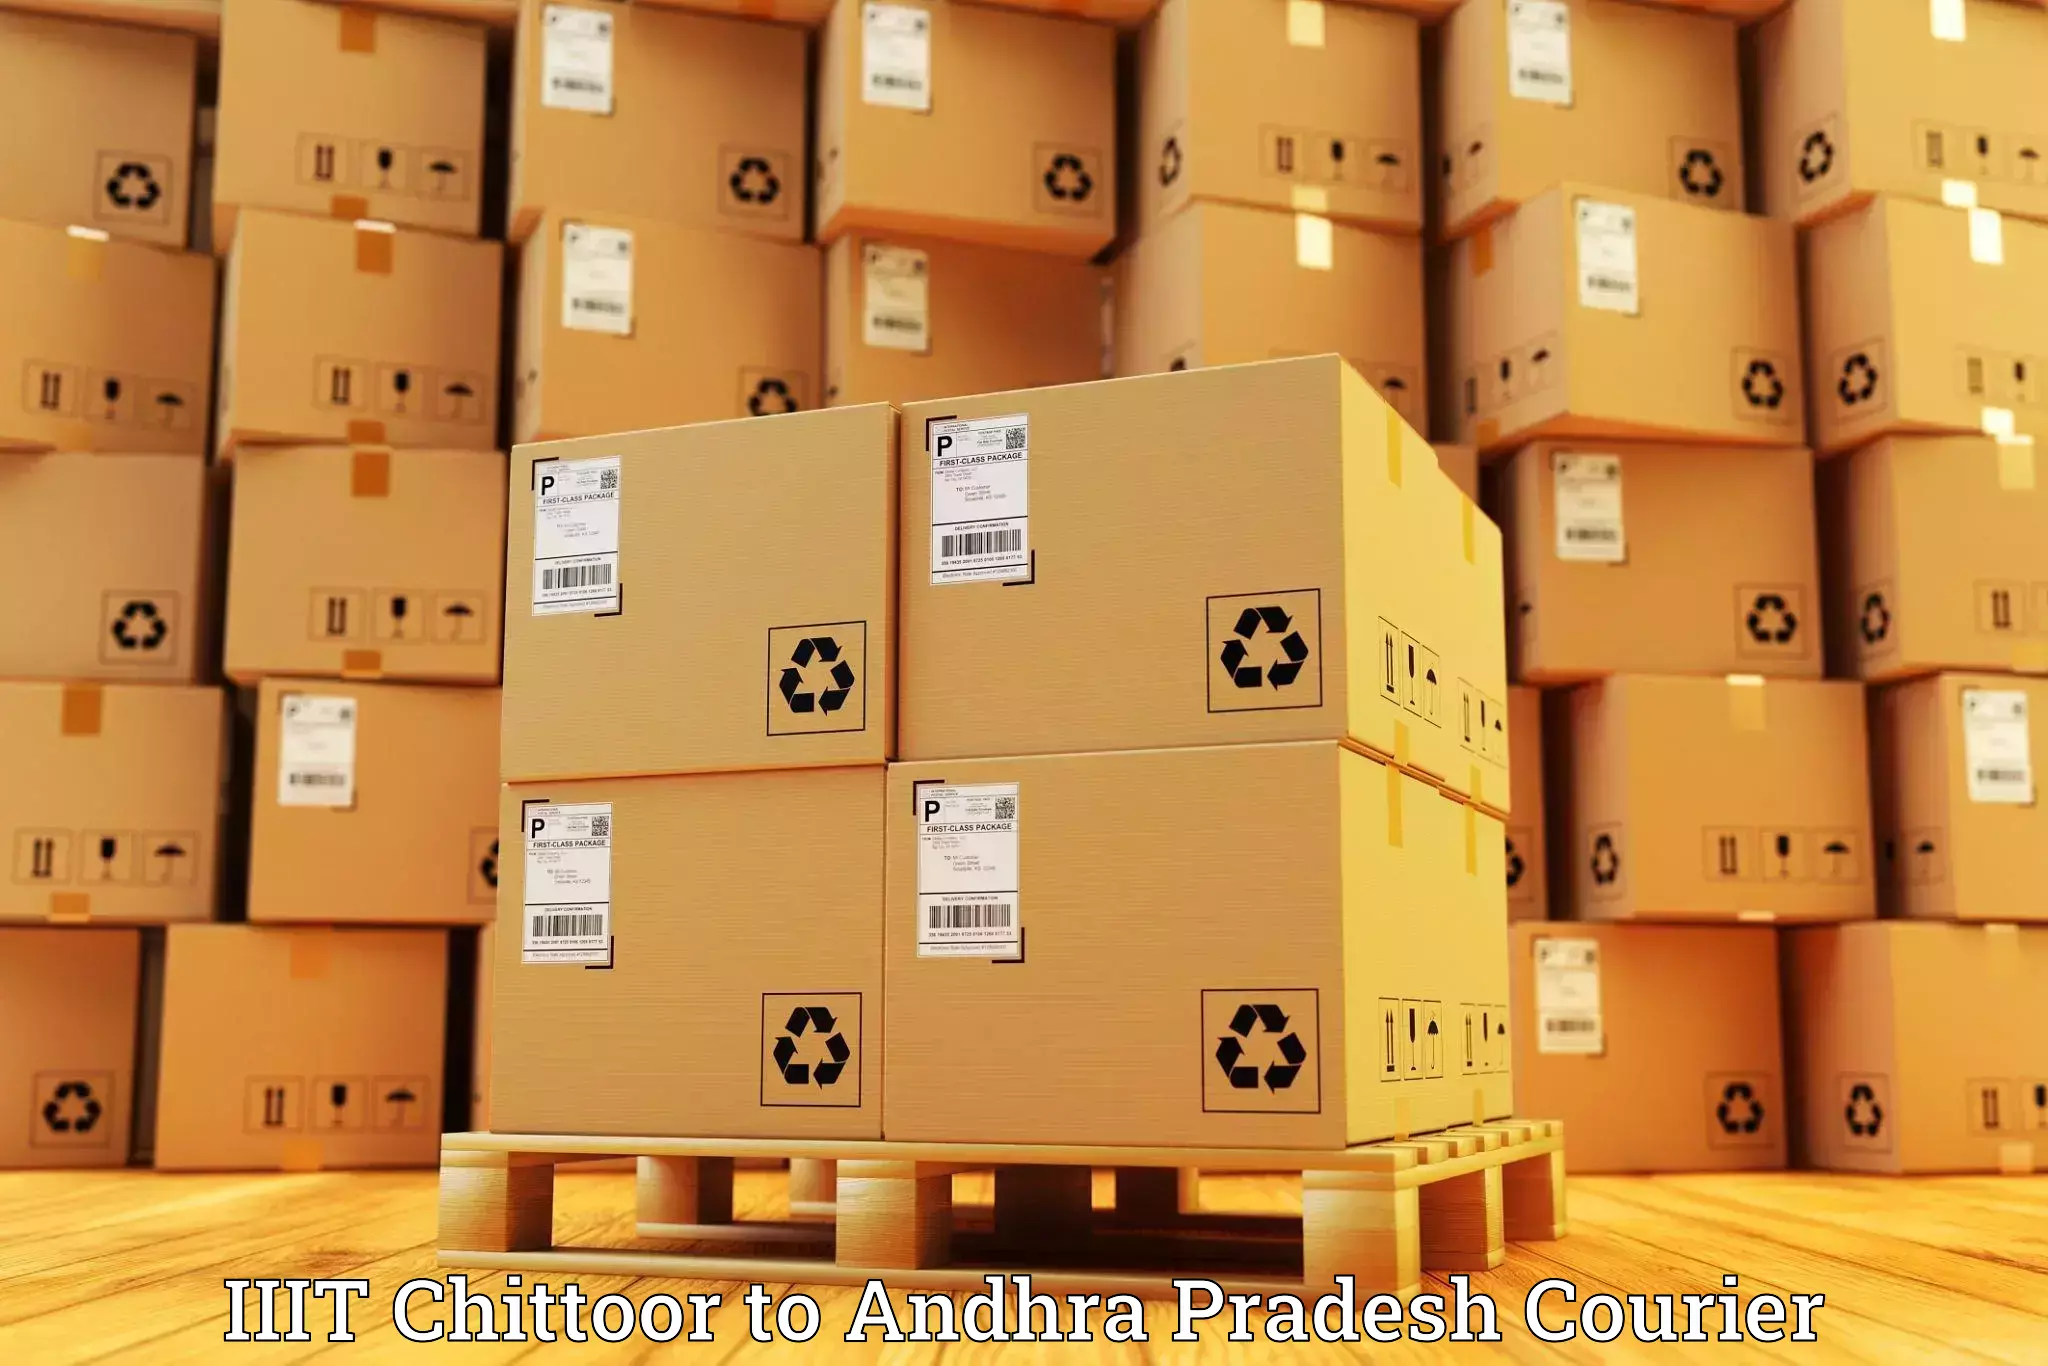 Tech-enabled shipping IIIT Chittoor to Gudivada